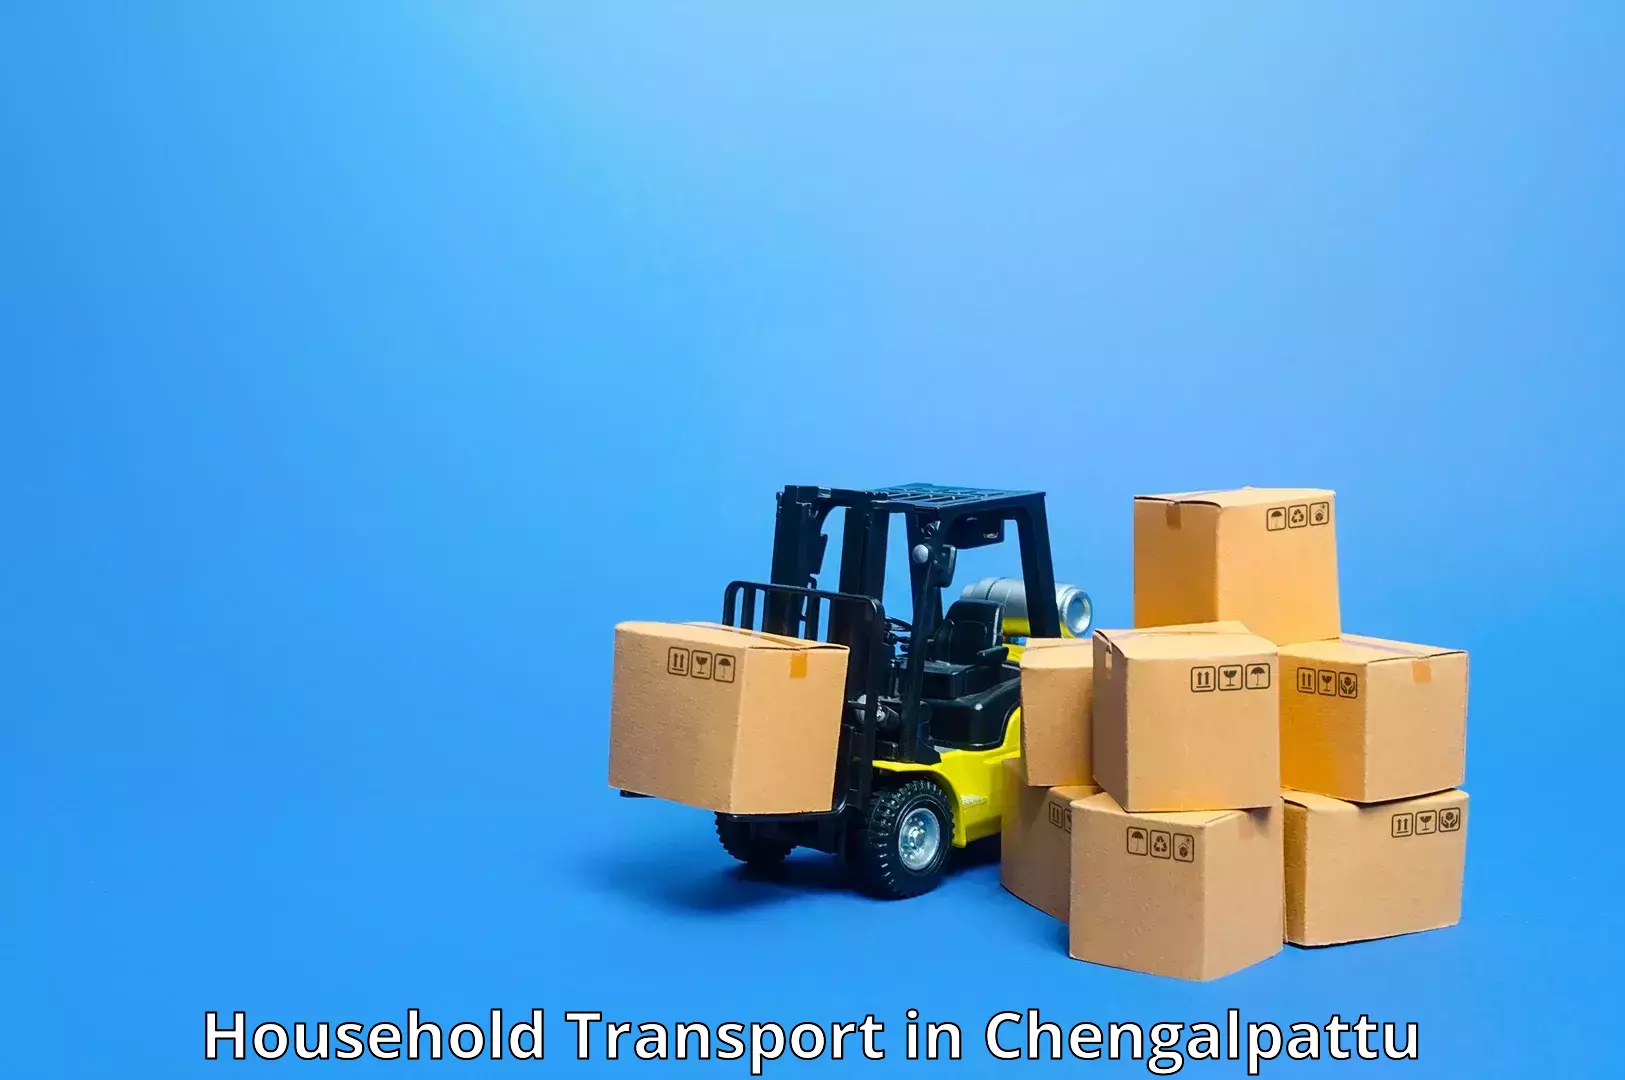 Quality moving and storage in Chengalpattu